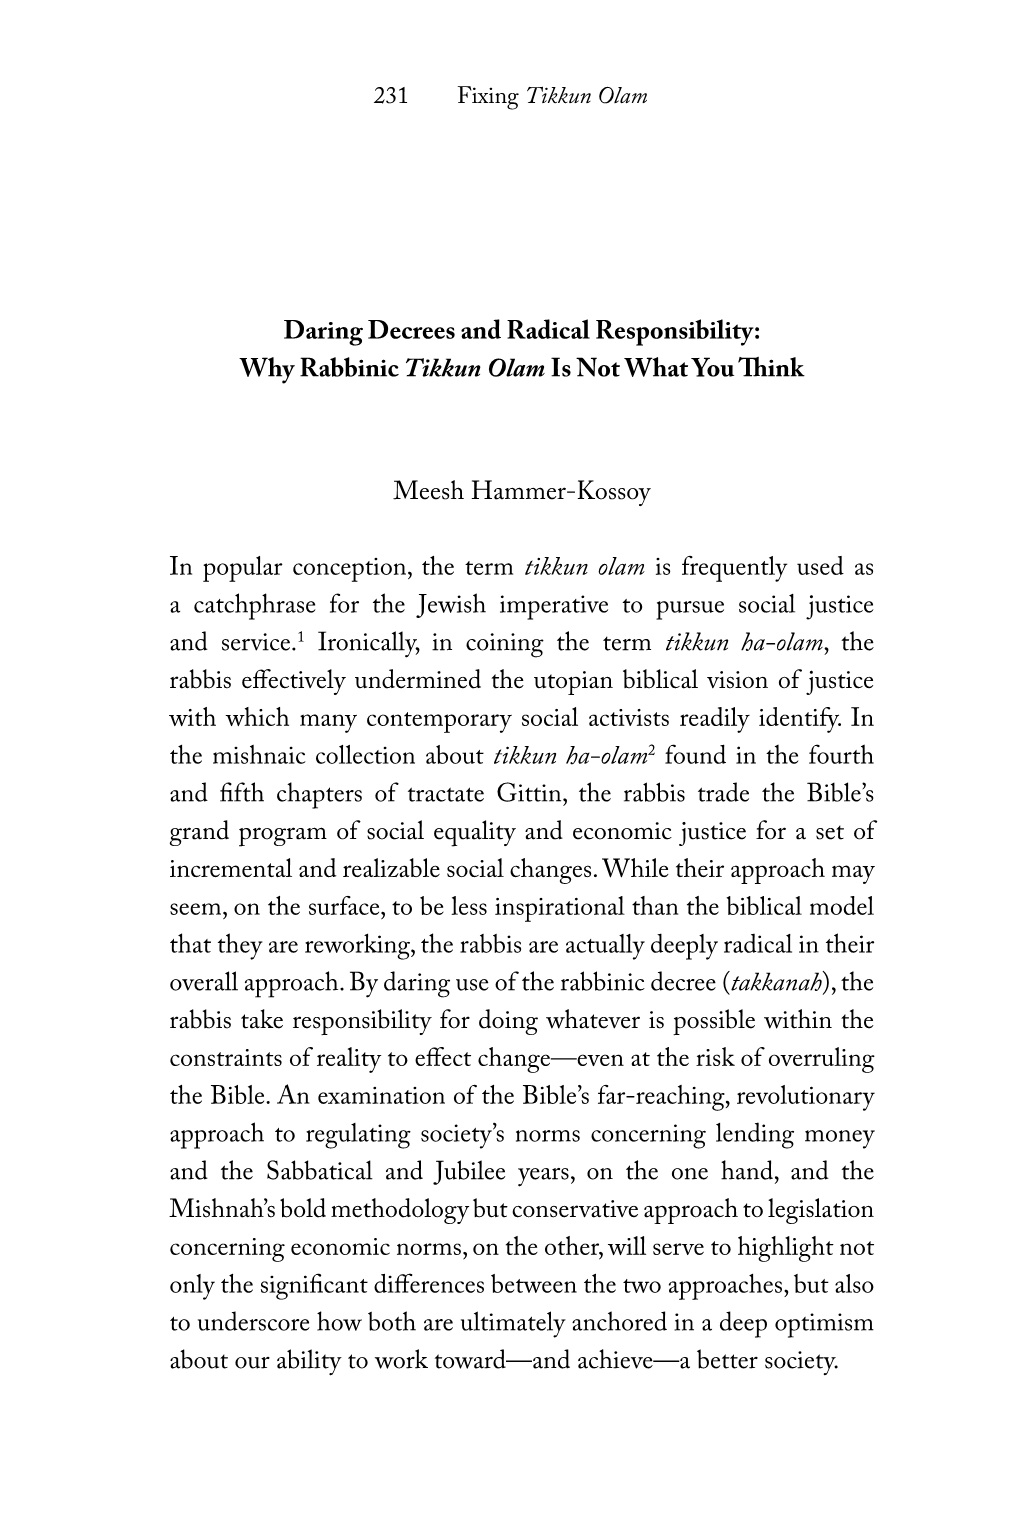 Daring Decrees and Radical Responsibility: Why Rabbinic Tikkun Olam Is Not What You Think